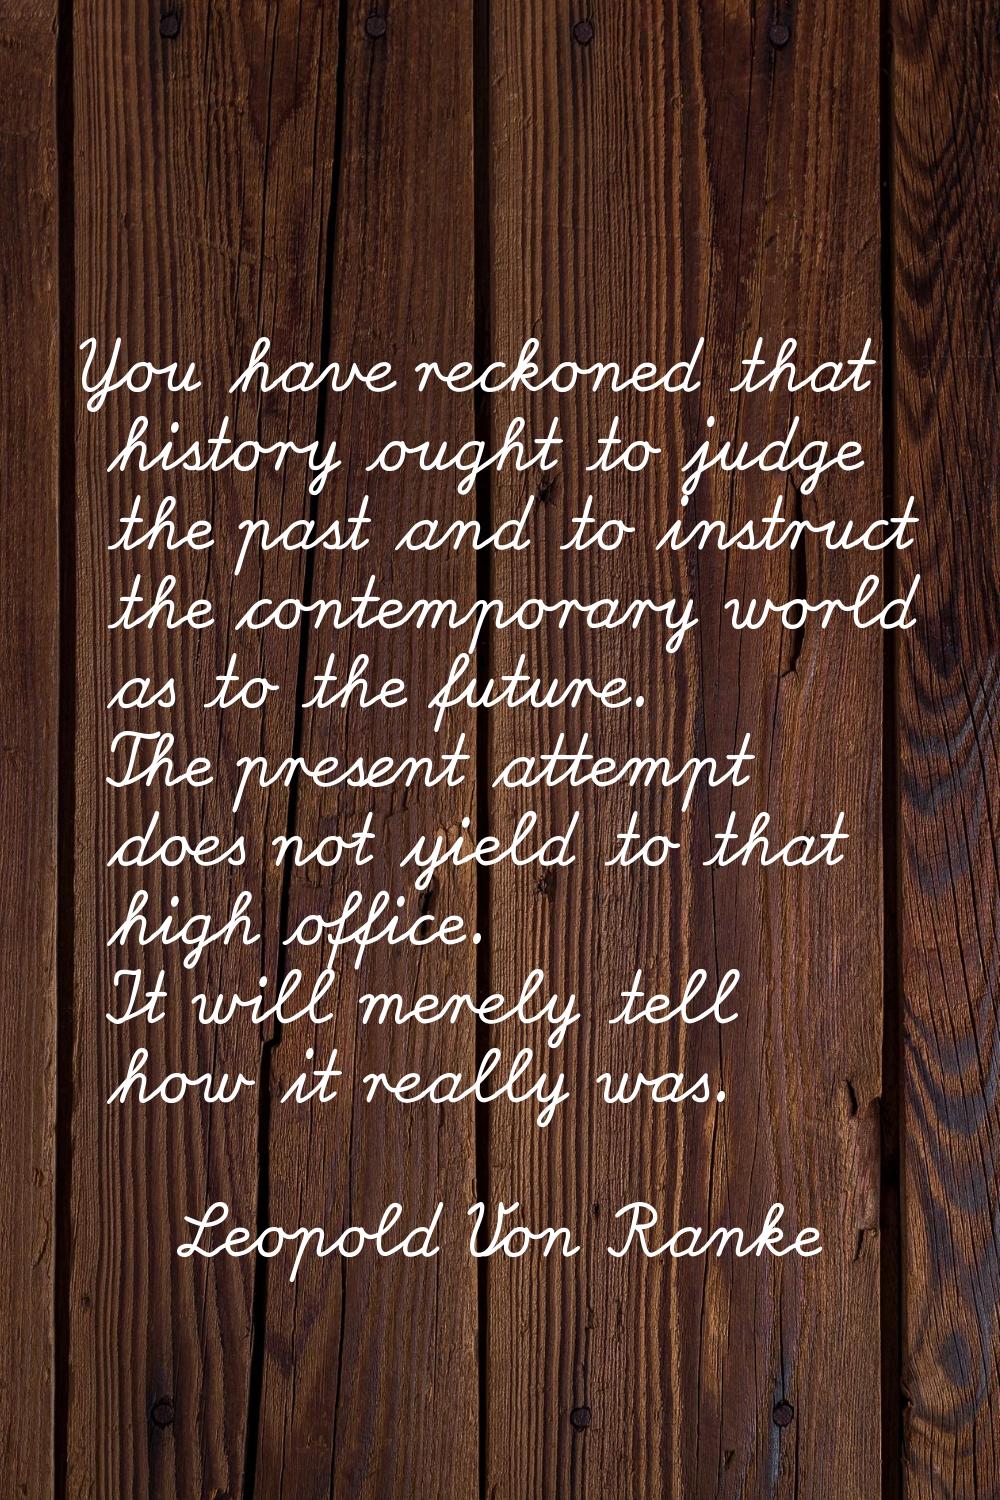 You have reckoned that history ought to judge the past and to instruct the contemporary world as to